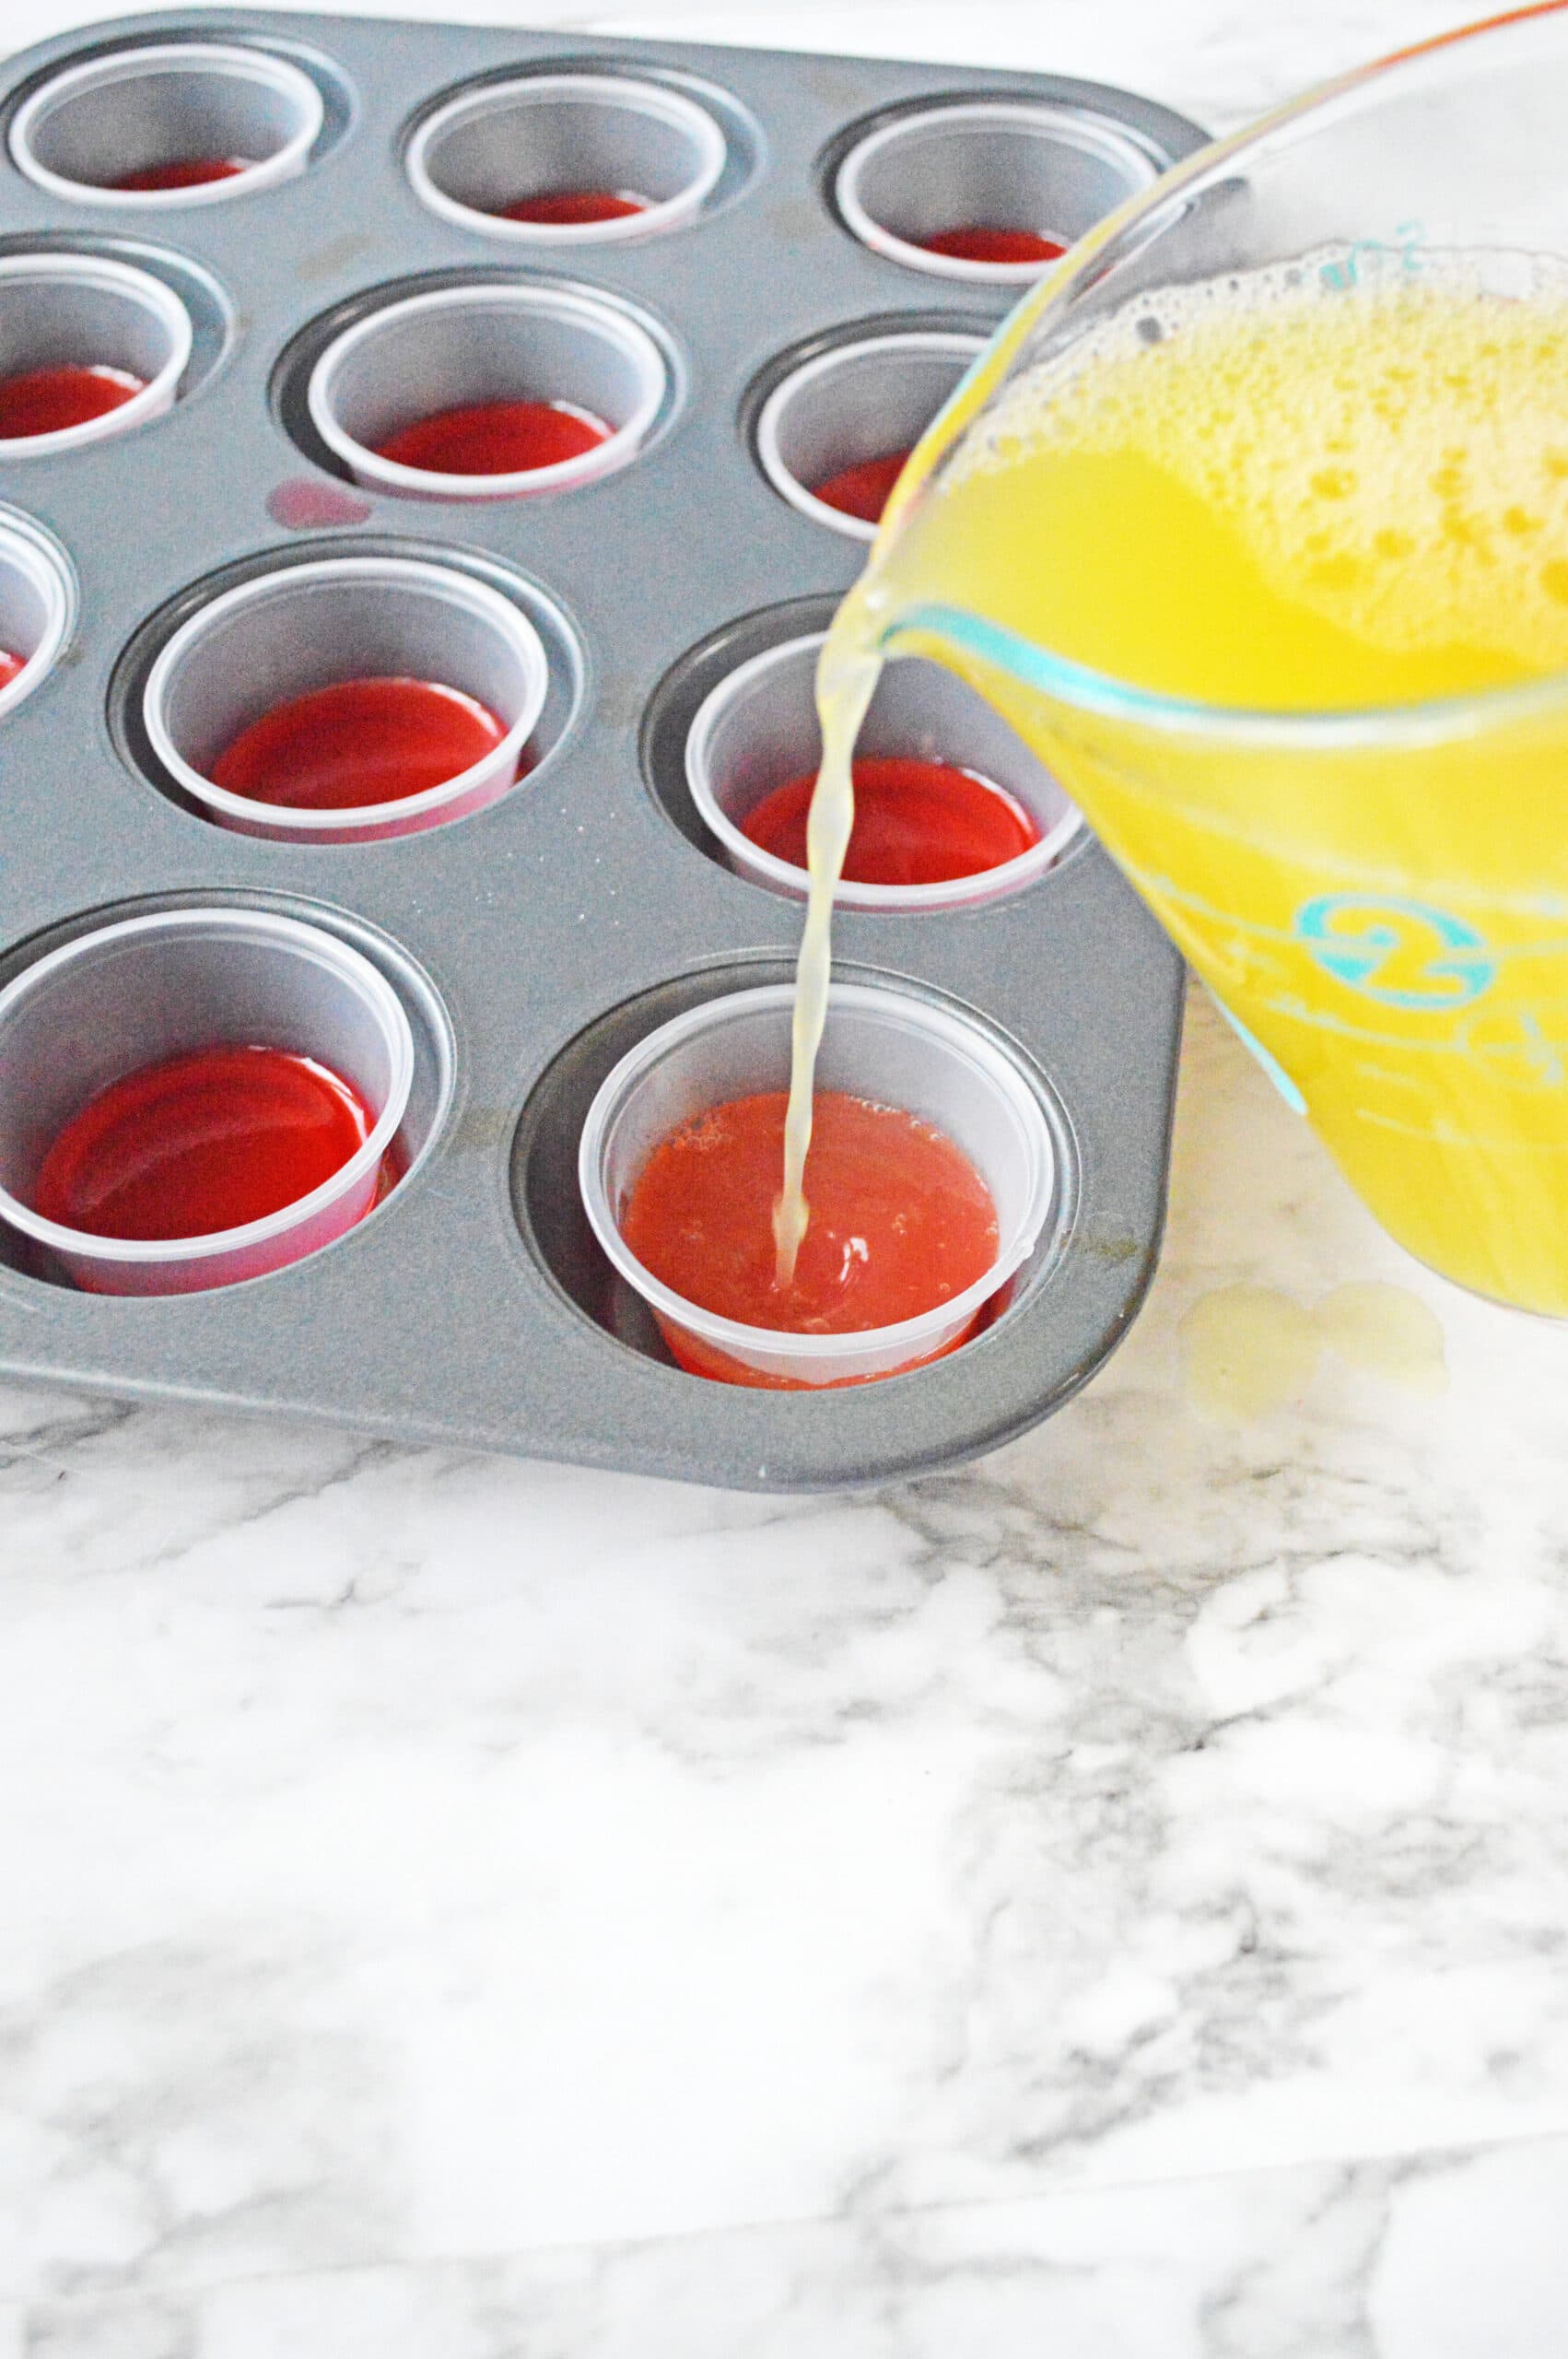 Pouring pineapple mixture into jello cups